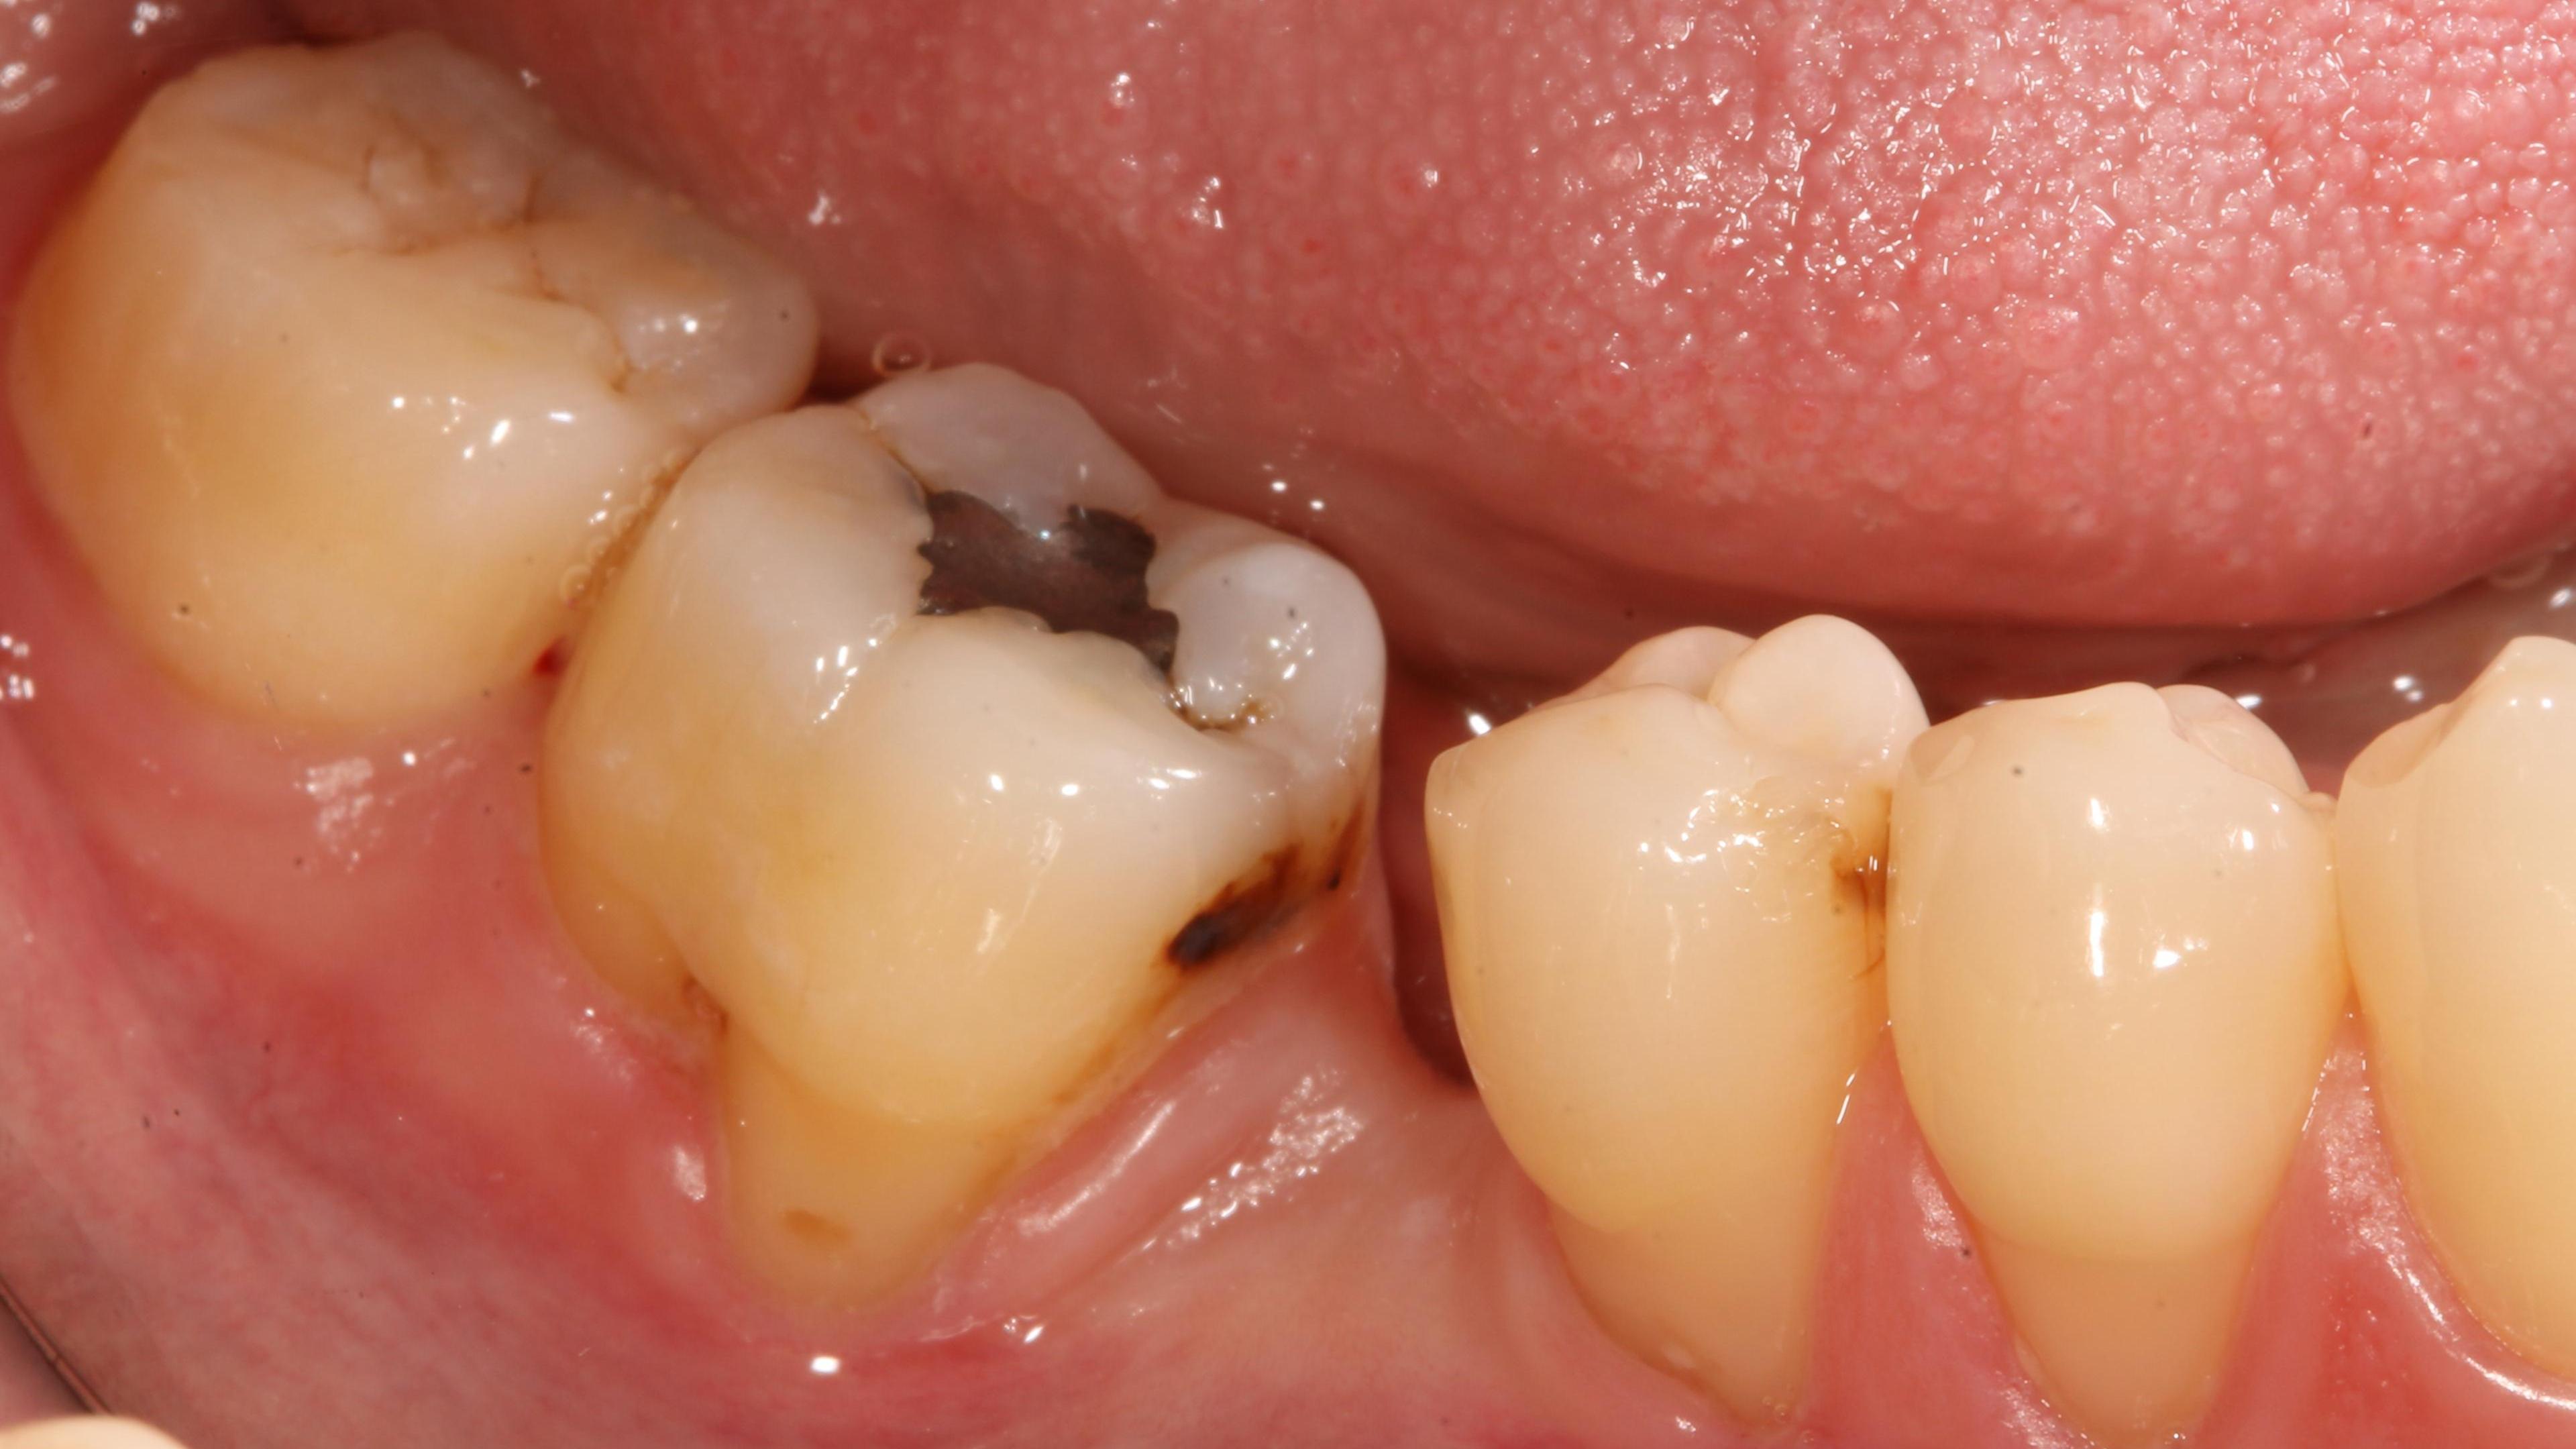 Periodontal plastic surgery Before treatment - Root recessions